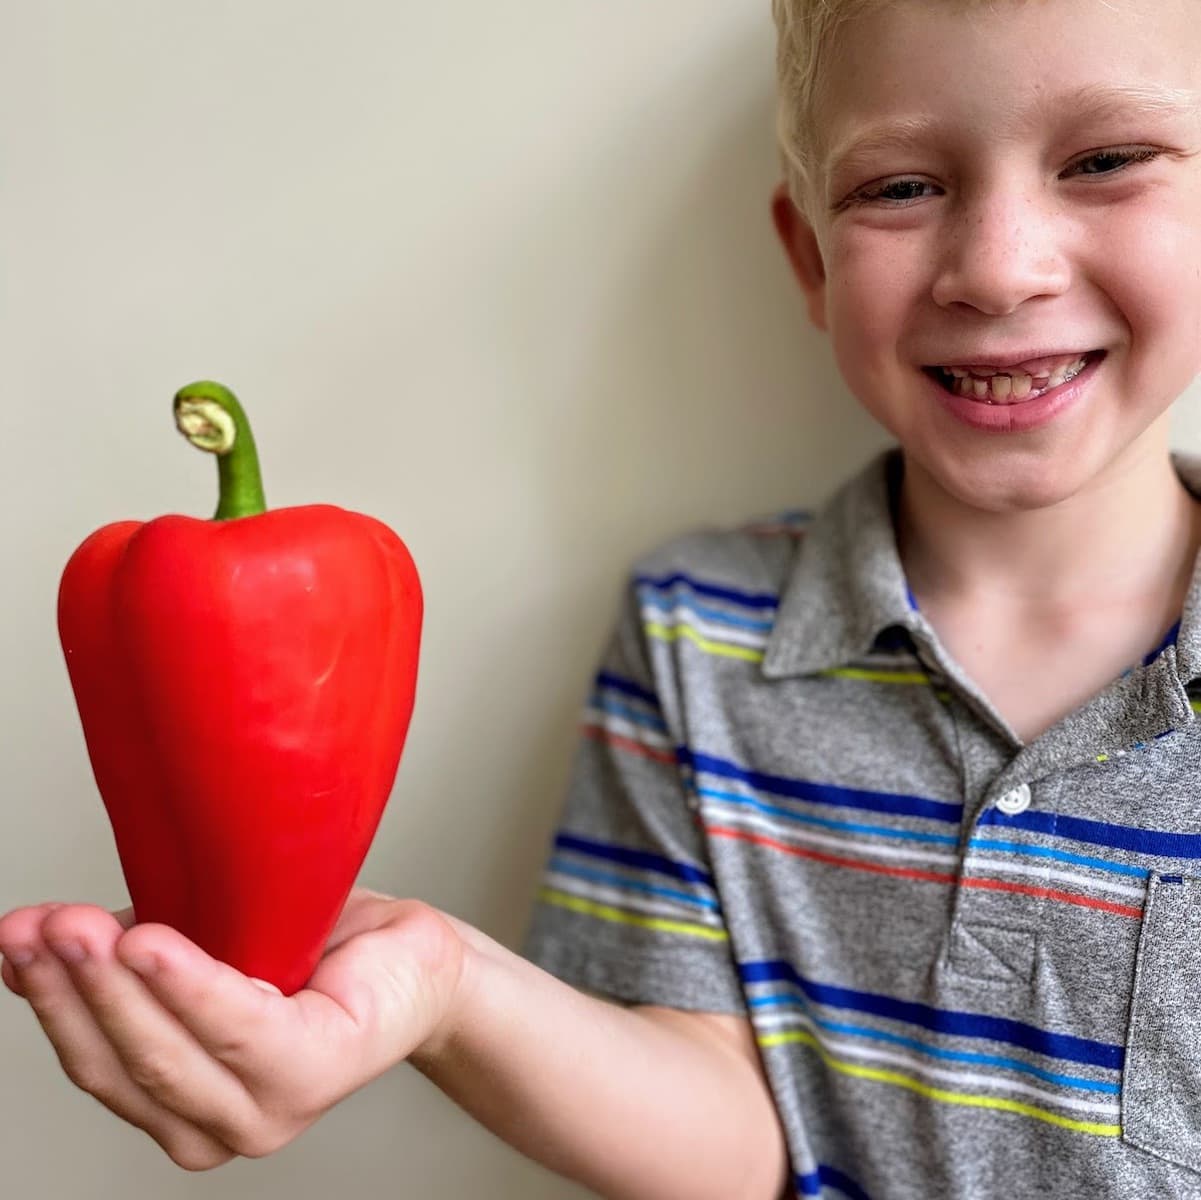 child holding red bell pepper